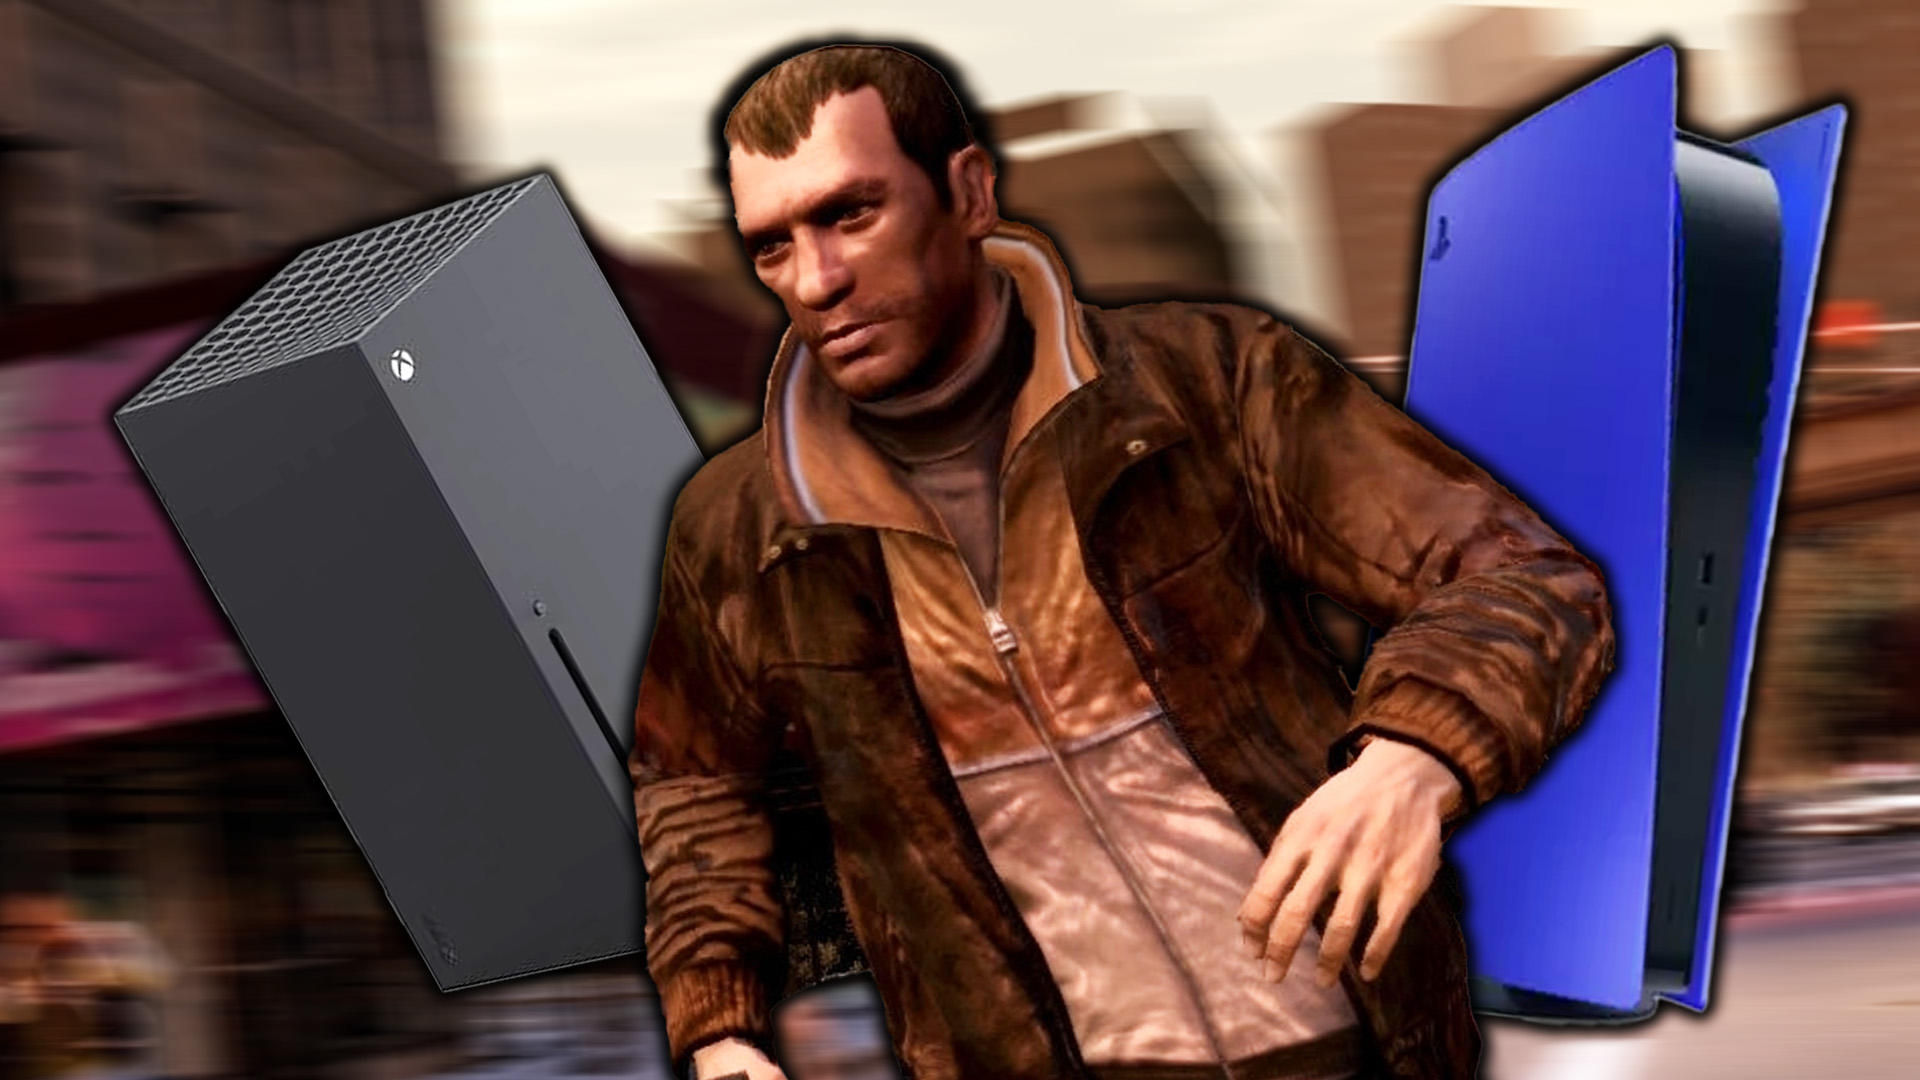 5 reasons why GTA 4 remastered should release on PS4 and PS5